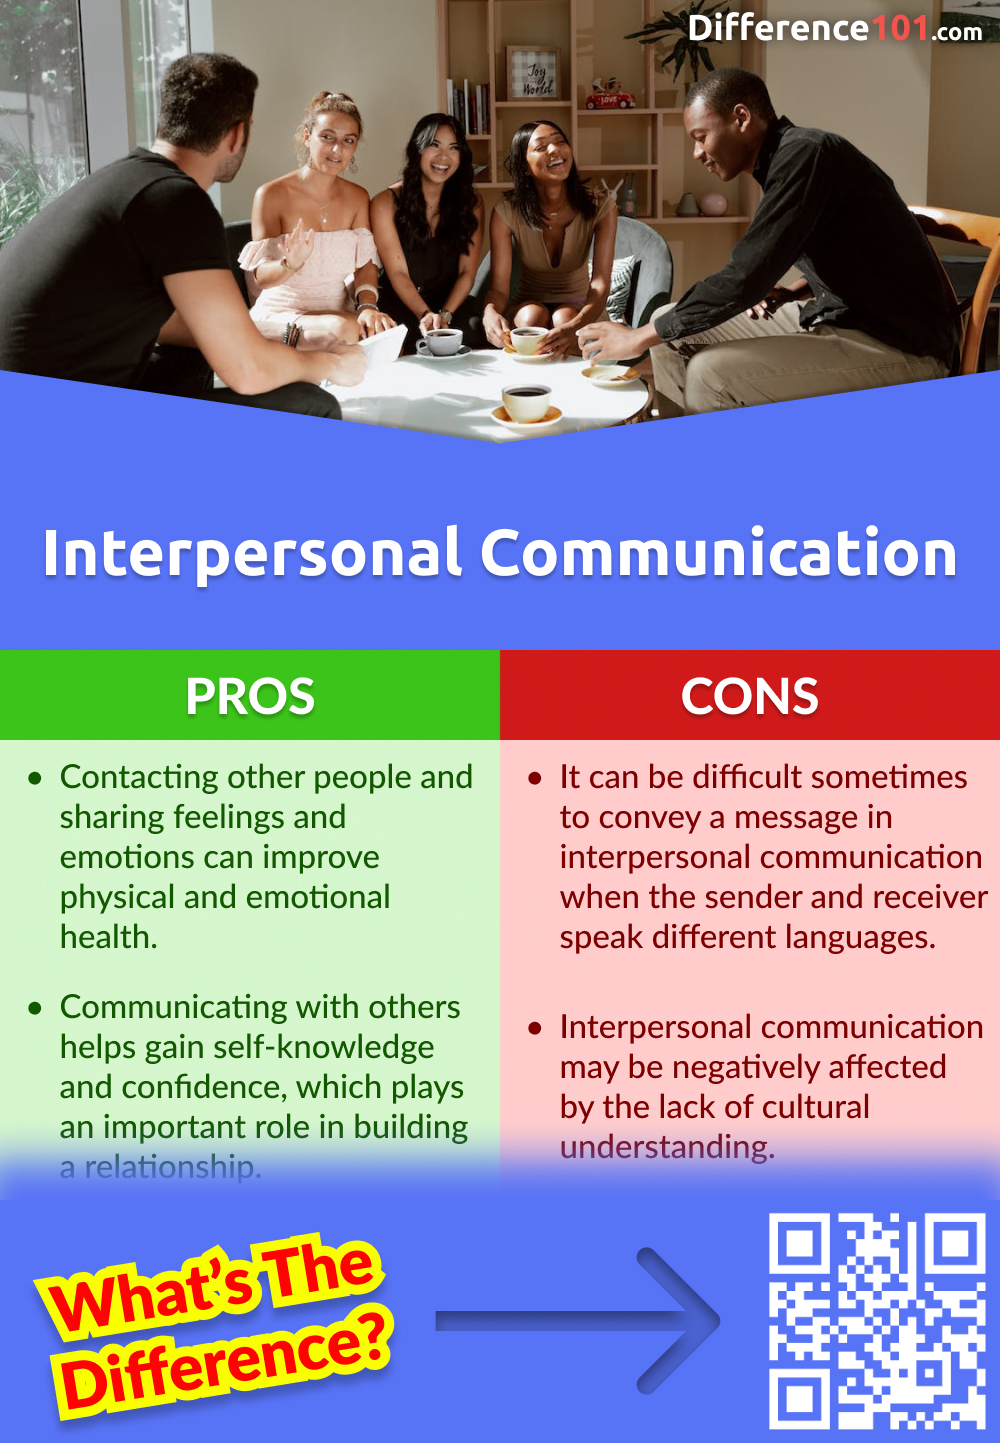 Interpersonal Communication Pros and Cons